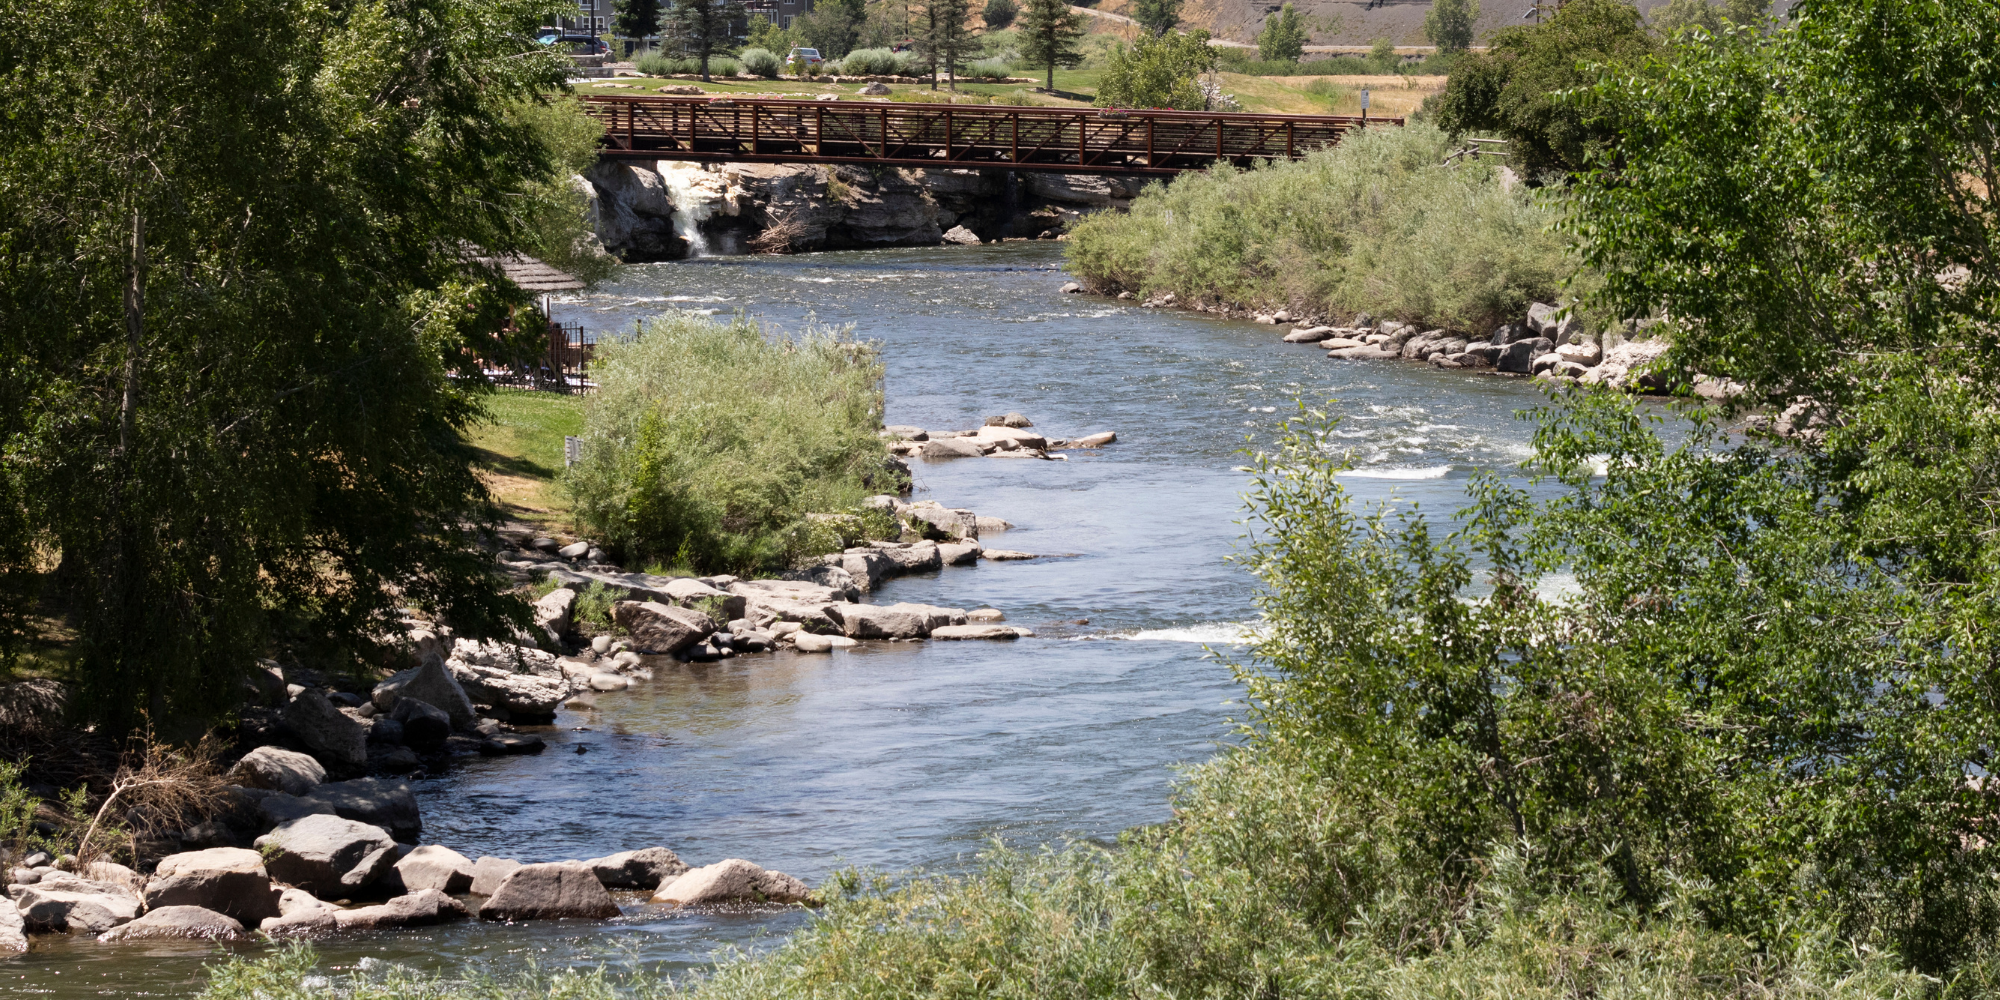 Spring brings whitewater AND exciting news from Arkansas River Tours